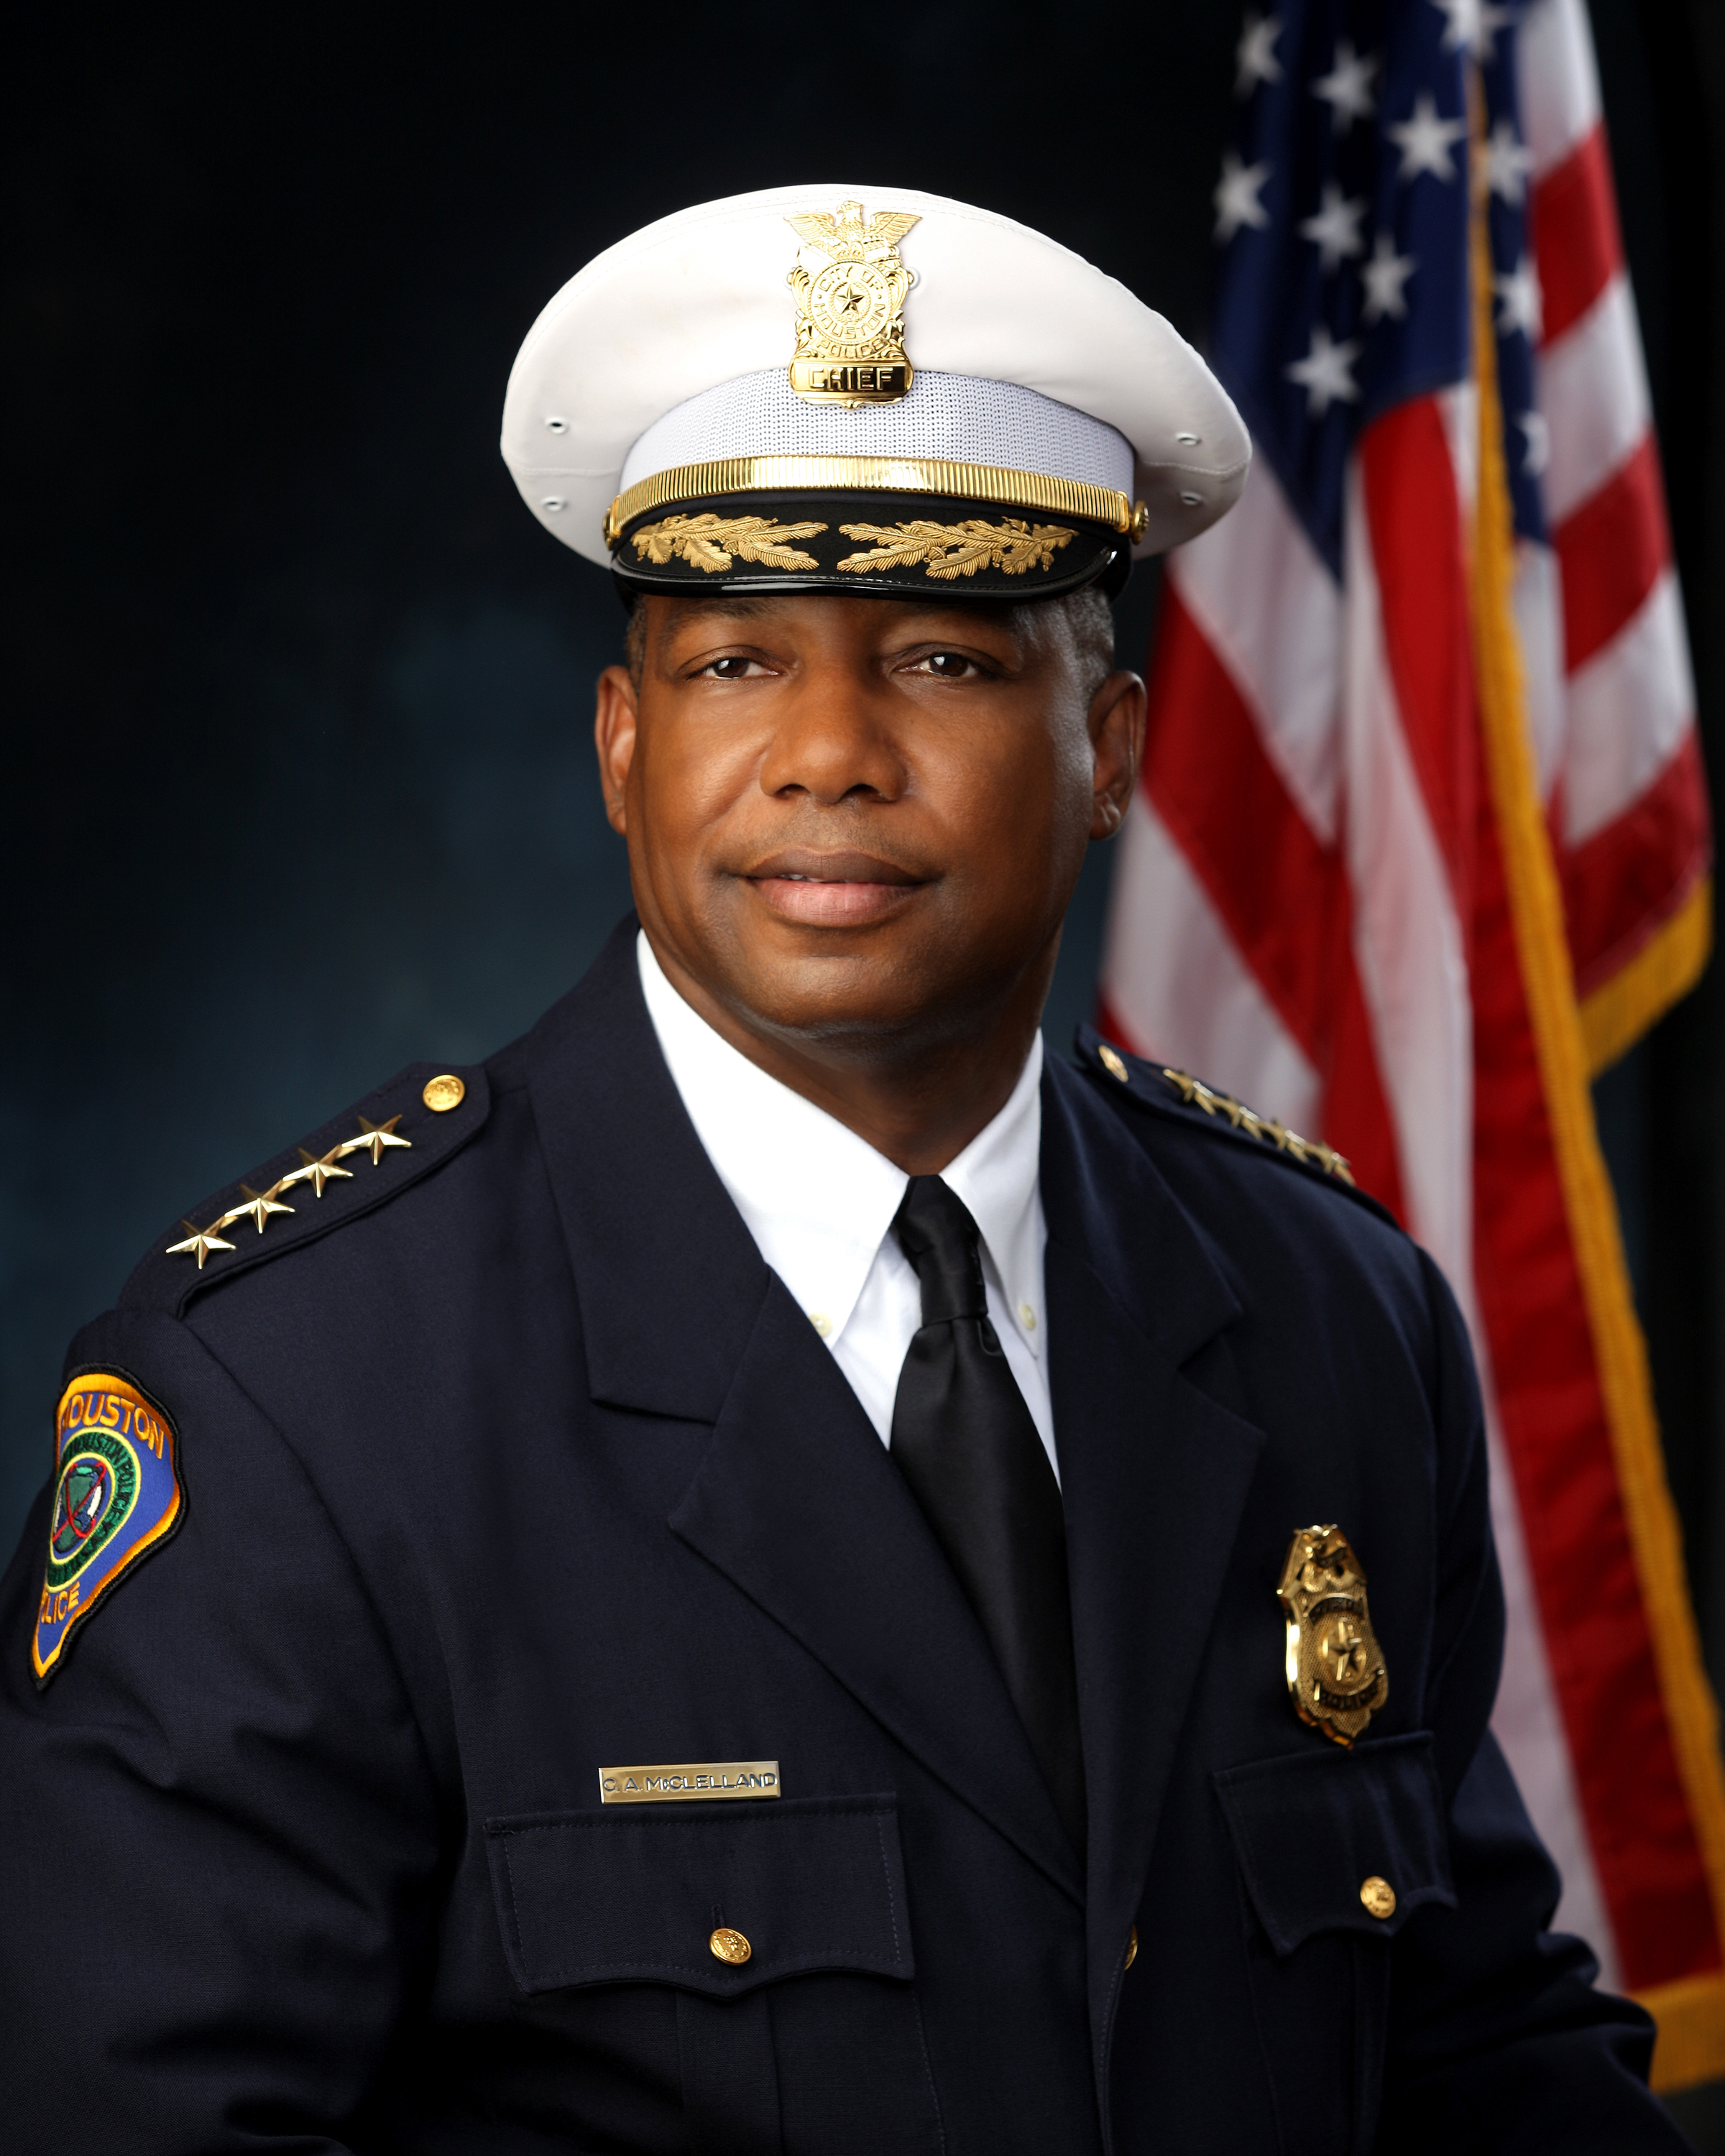 Photo: Official portrait of HPD Chief McClelland. Photo courtesy of Houston Police Department.